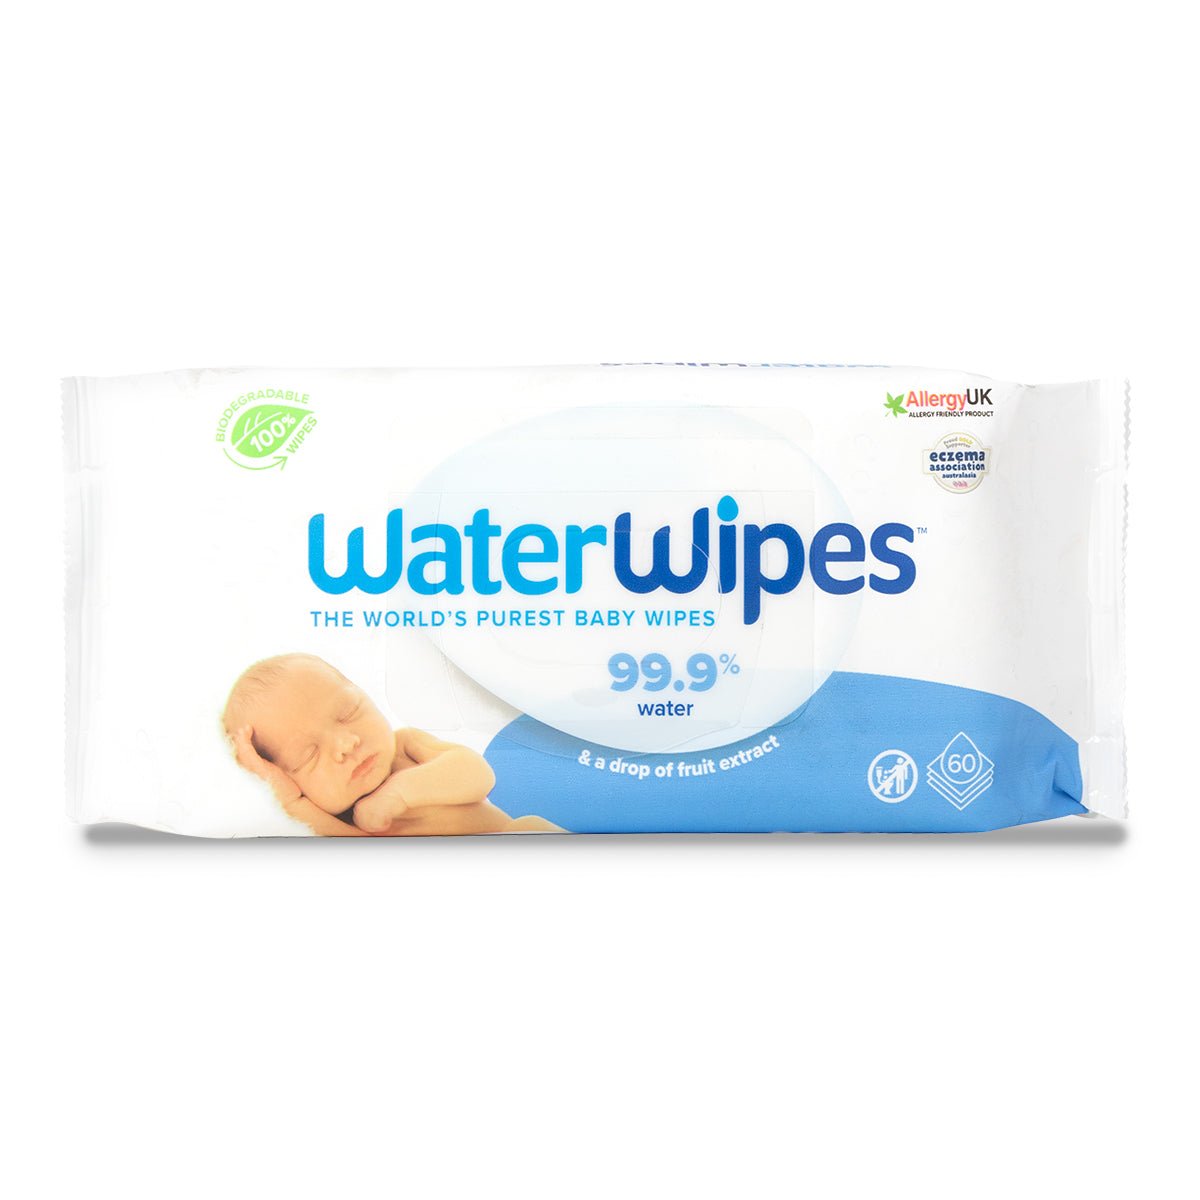 WaterWipes Baby Wipes: You Need to Know This!